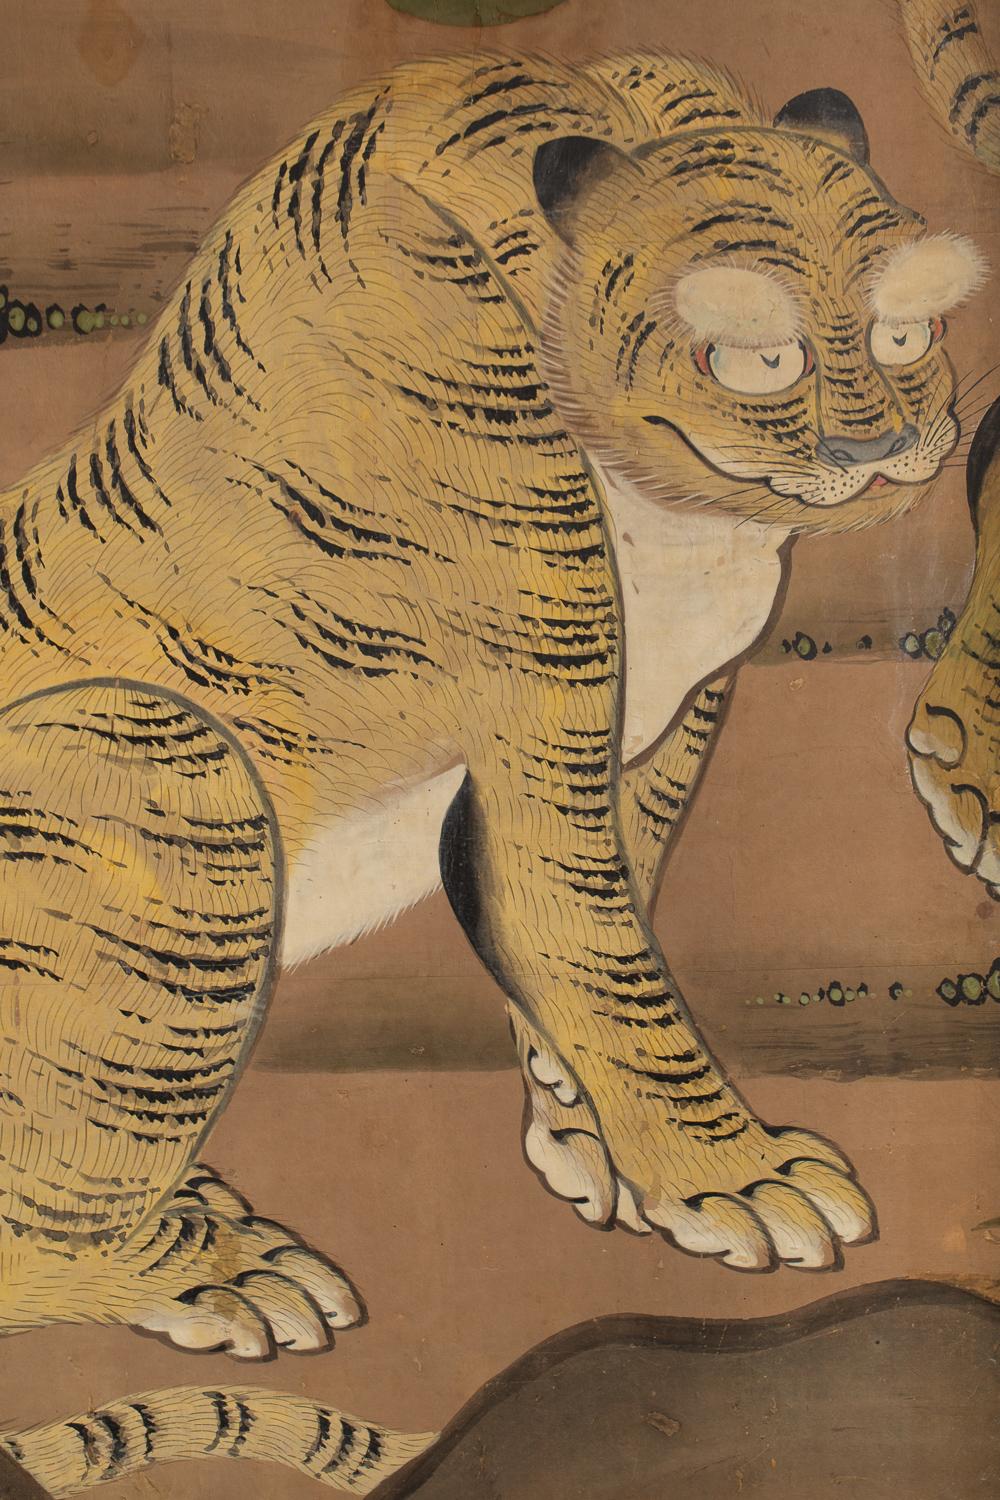 Two tigers exchanging amorous glances. Kano School painting.